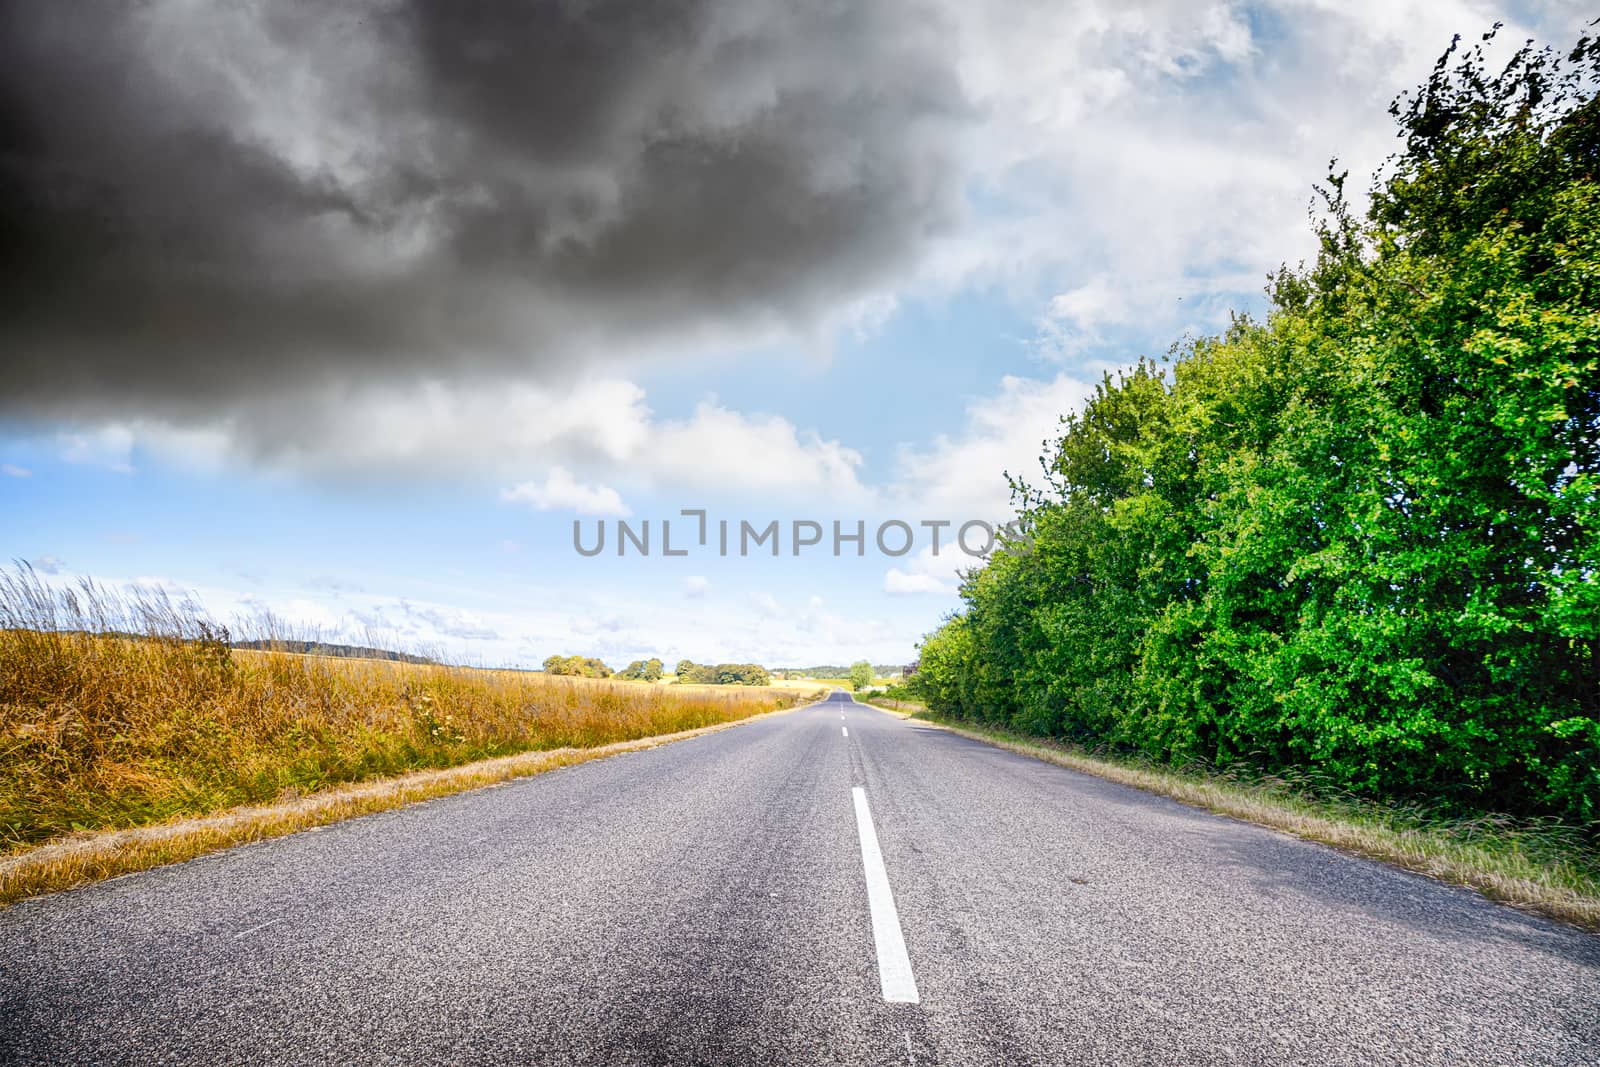 Asphalt road in a rural landscape with vibrant colors under a cloudy sky